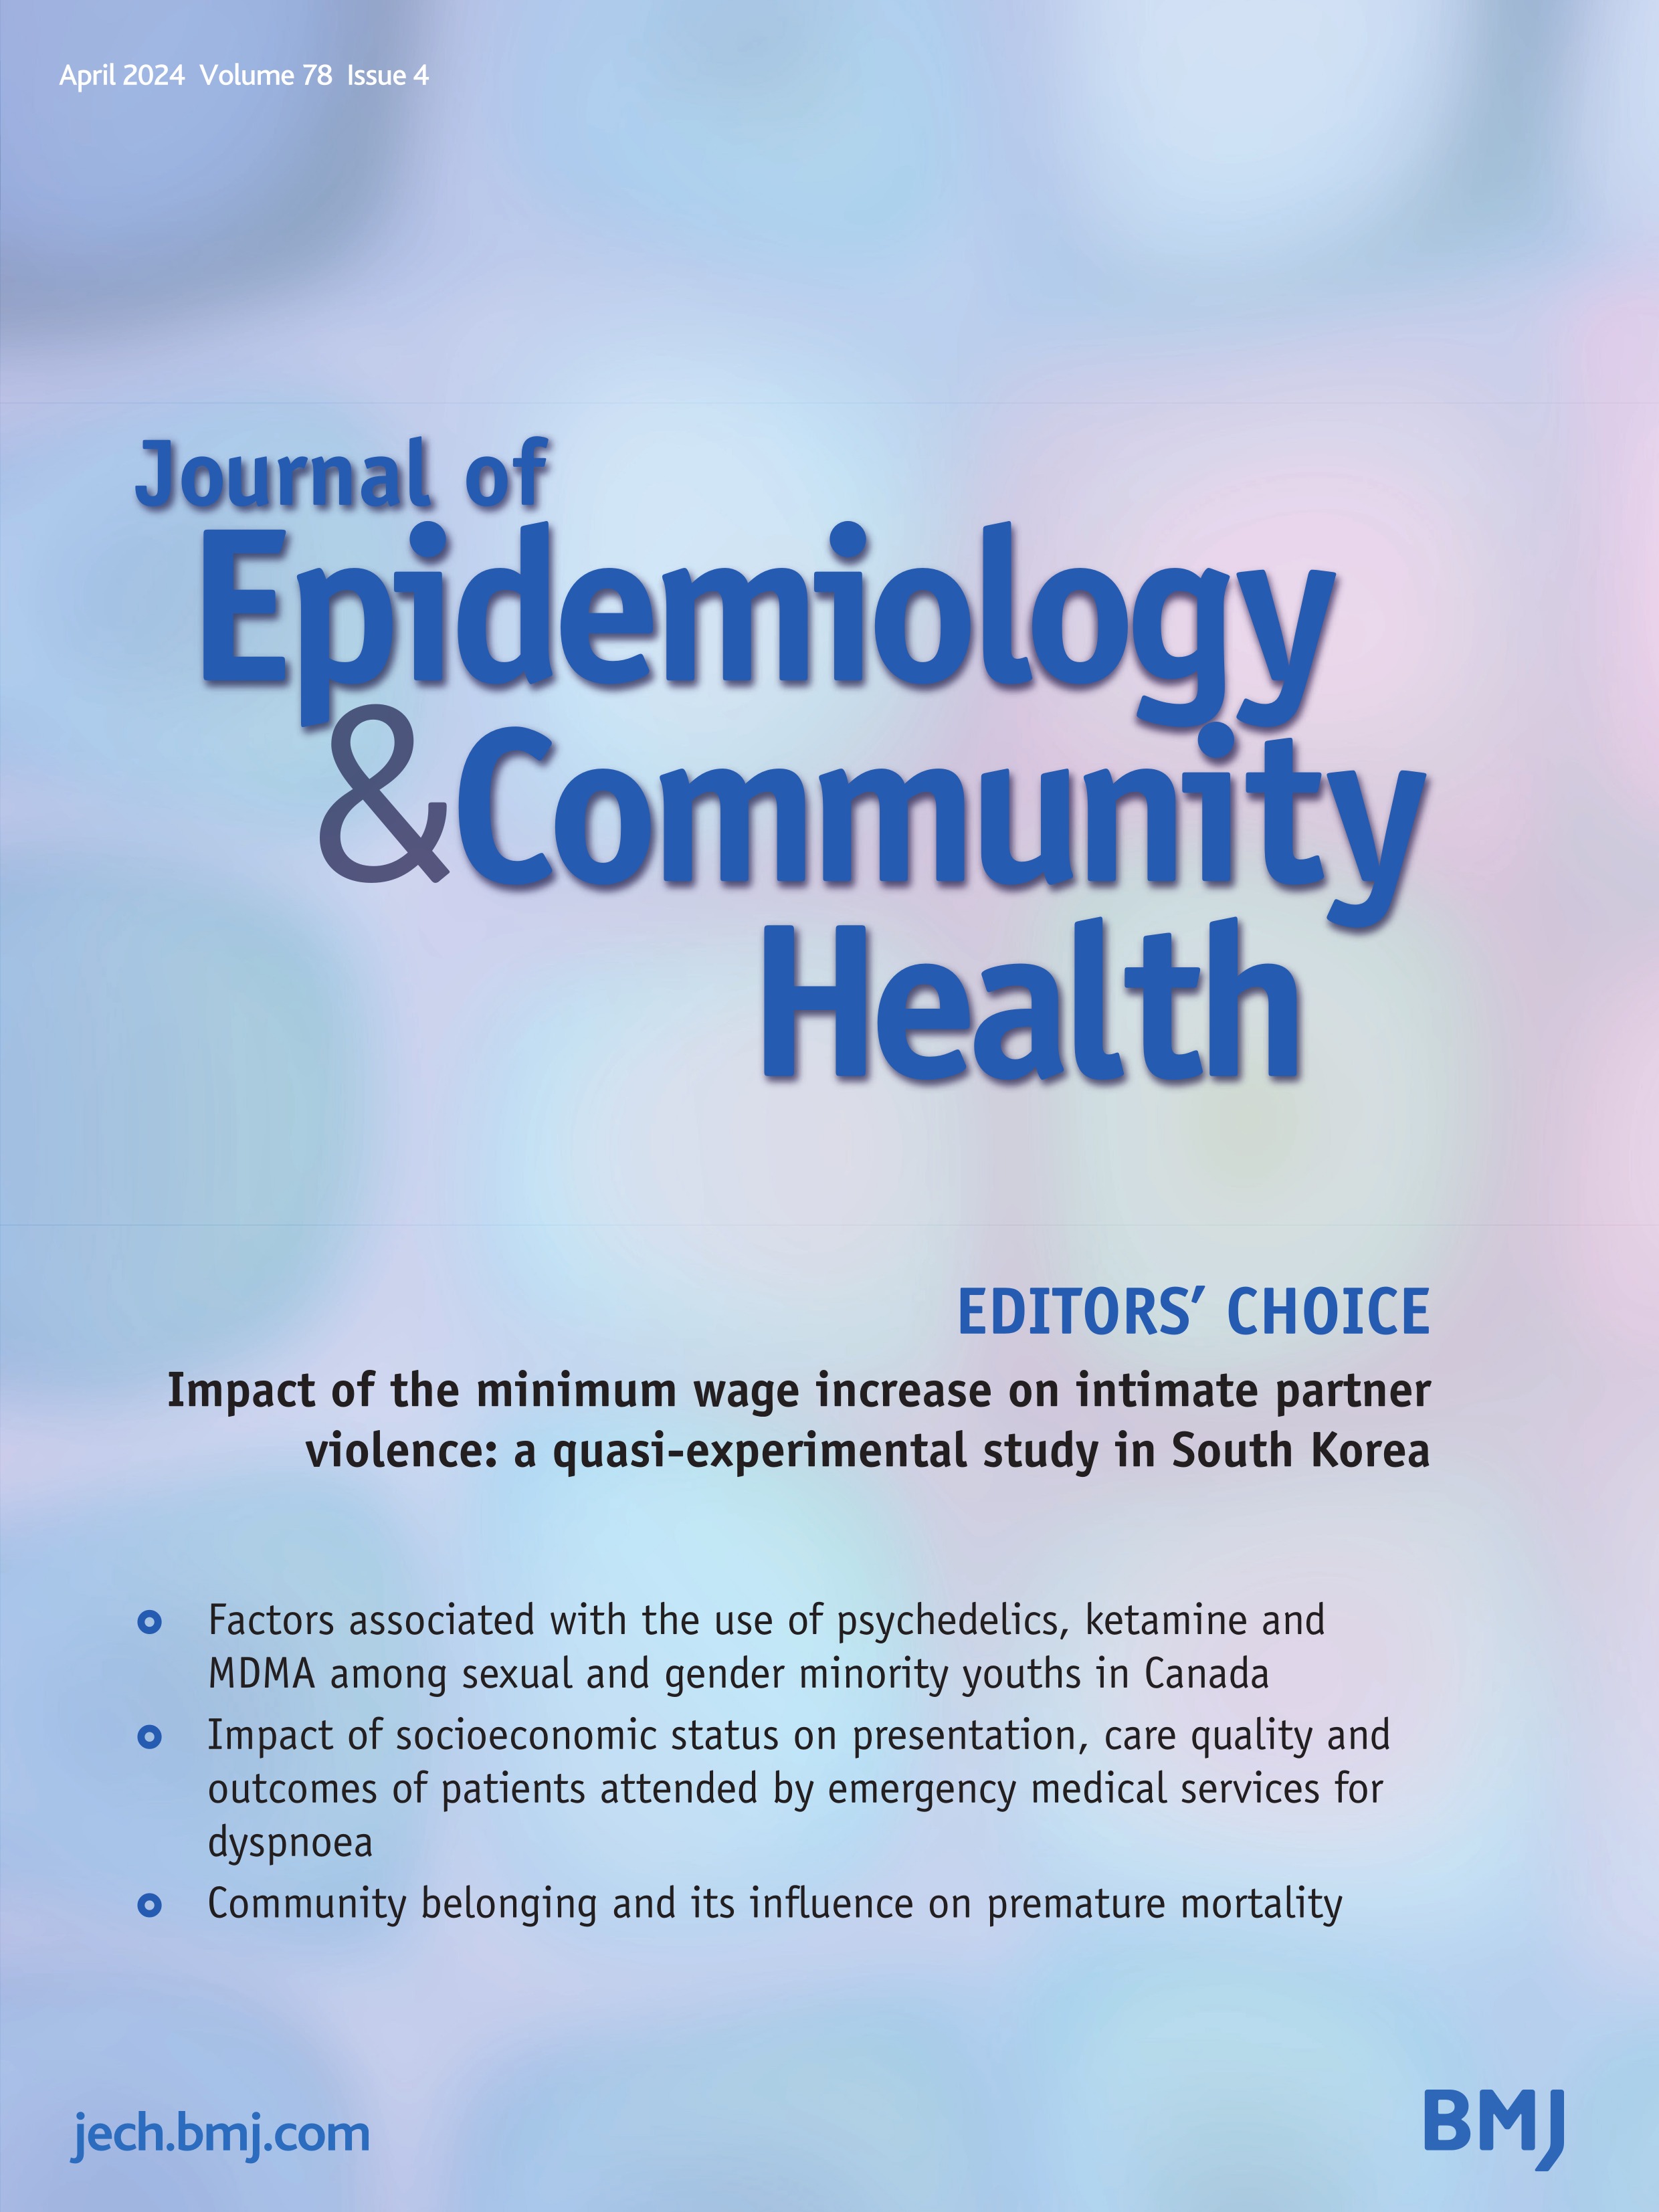 A national cohort study of community belonging and its influence on premature mortality